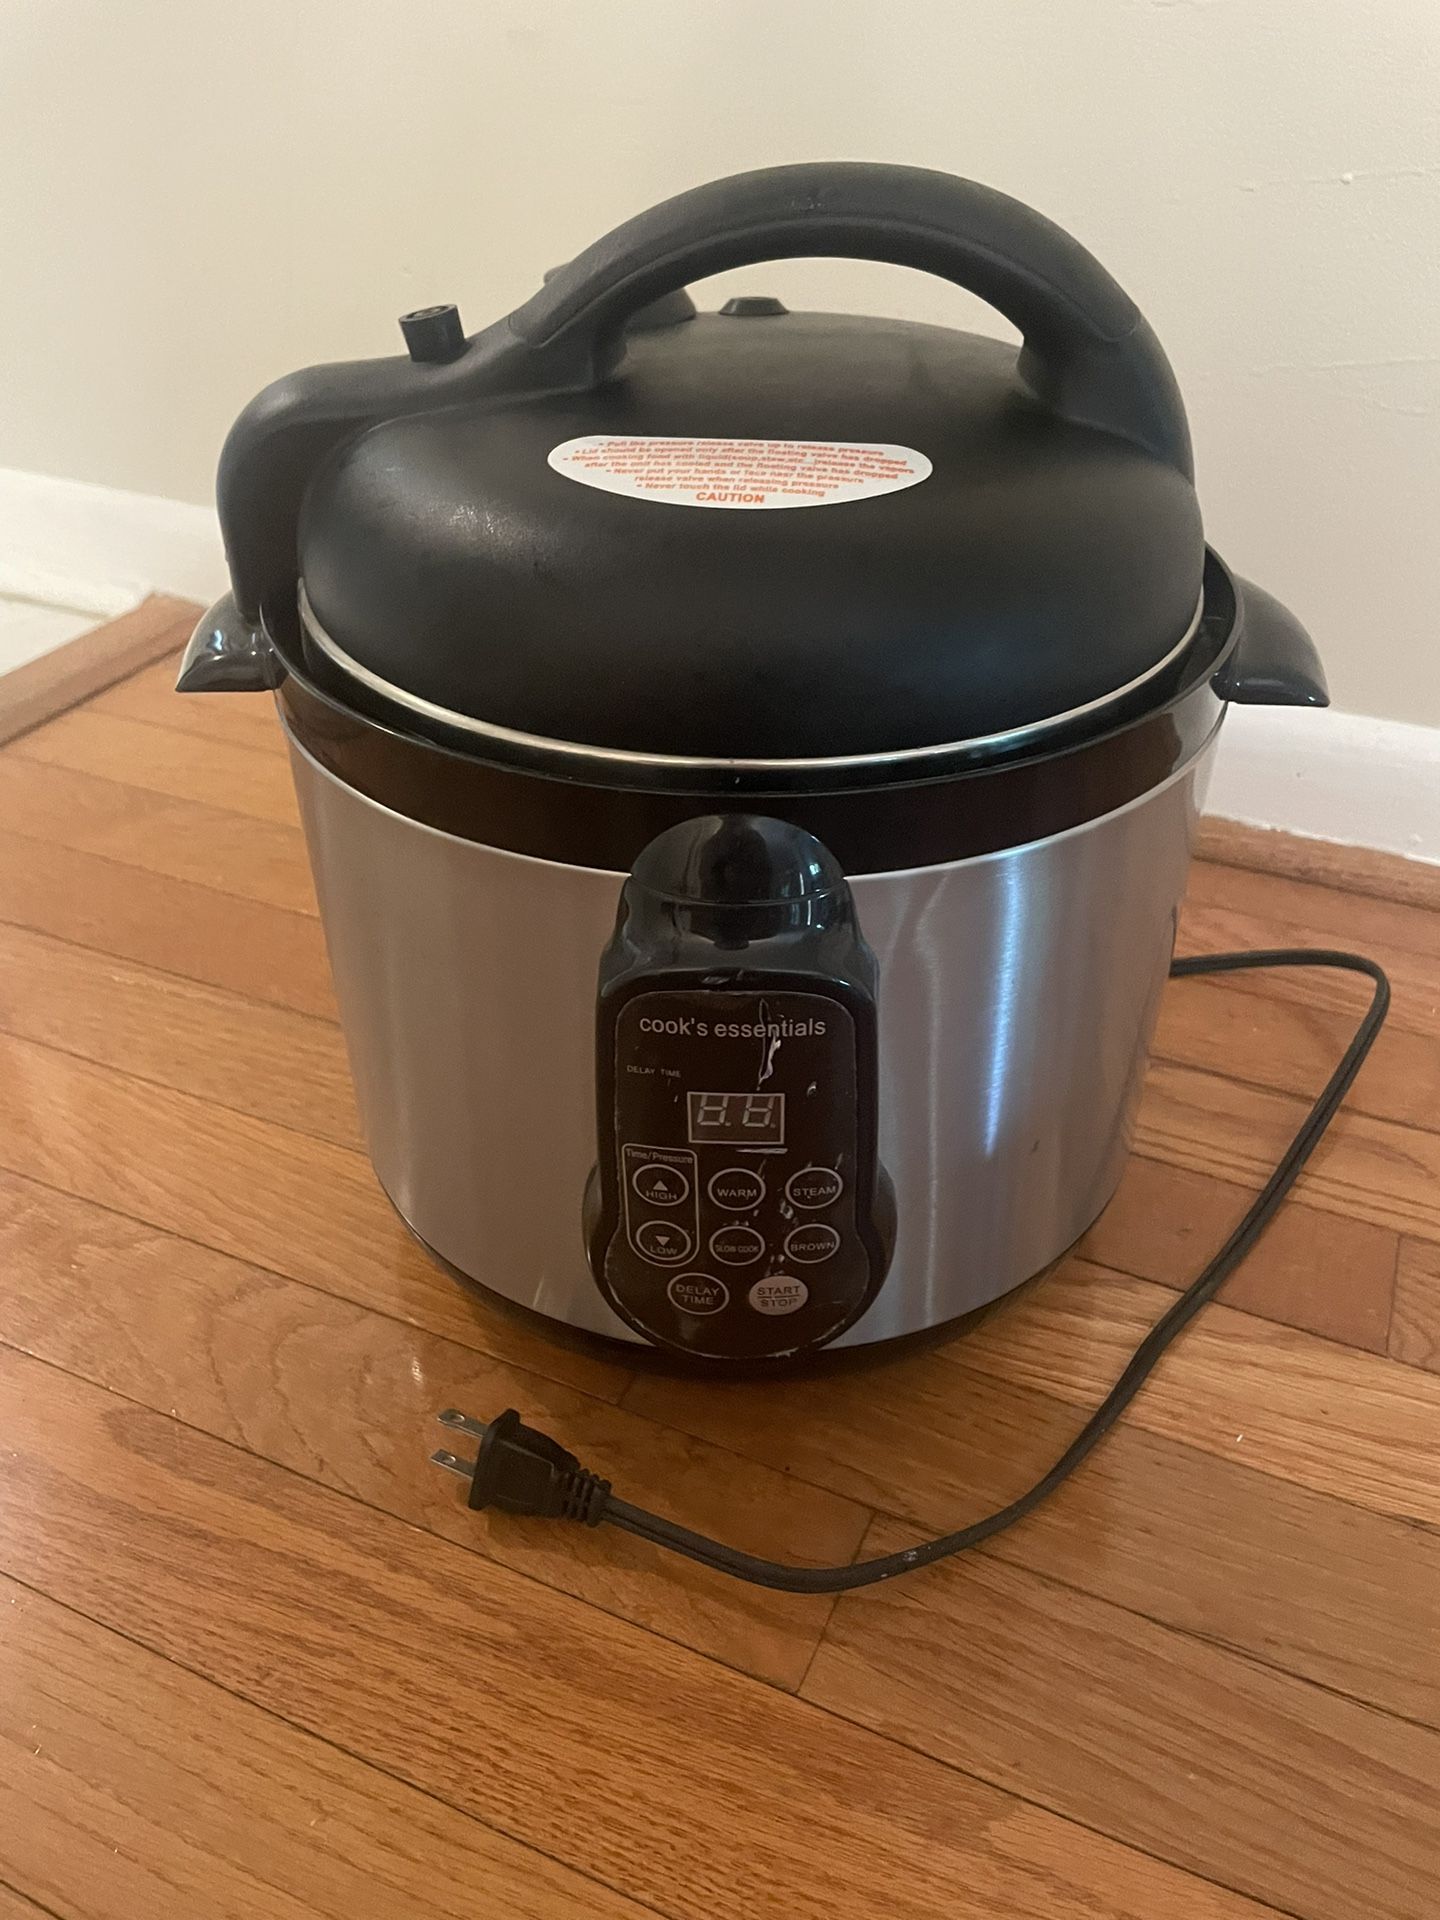 Cook’s Essentials 4-Quart Pressure Cooker, Used <5 Times, Used/Like New for  Sale in Rockville, MD - OfferUp